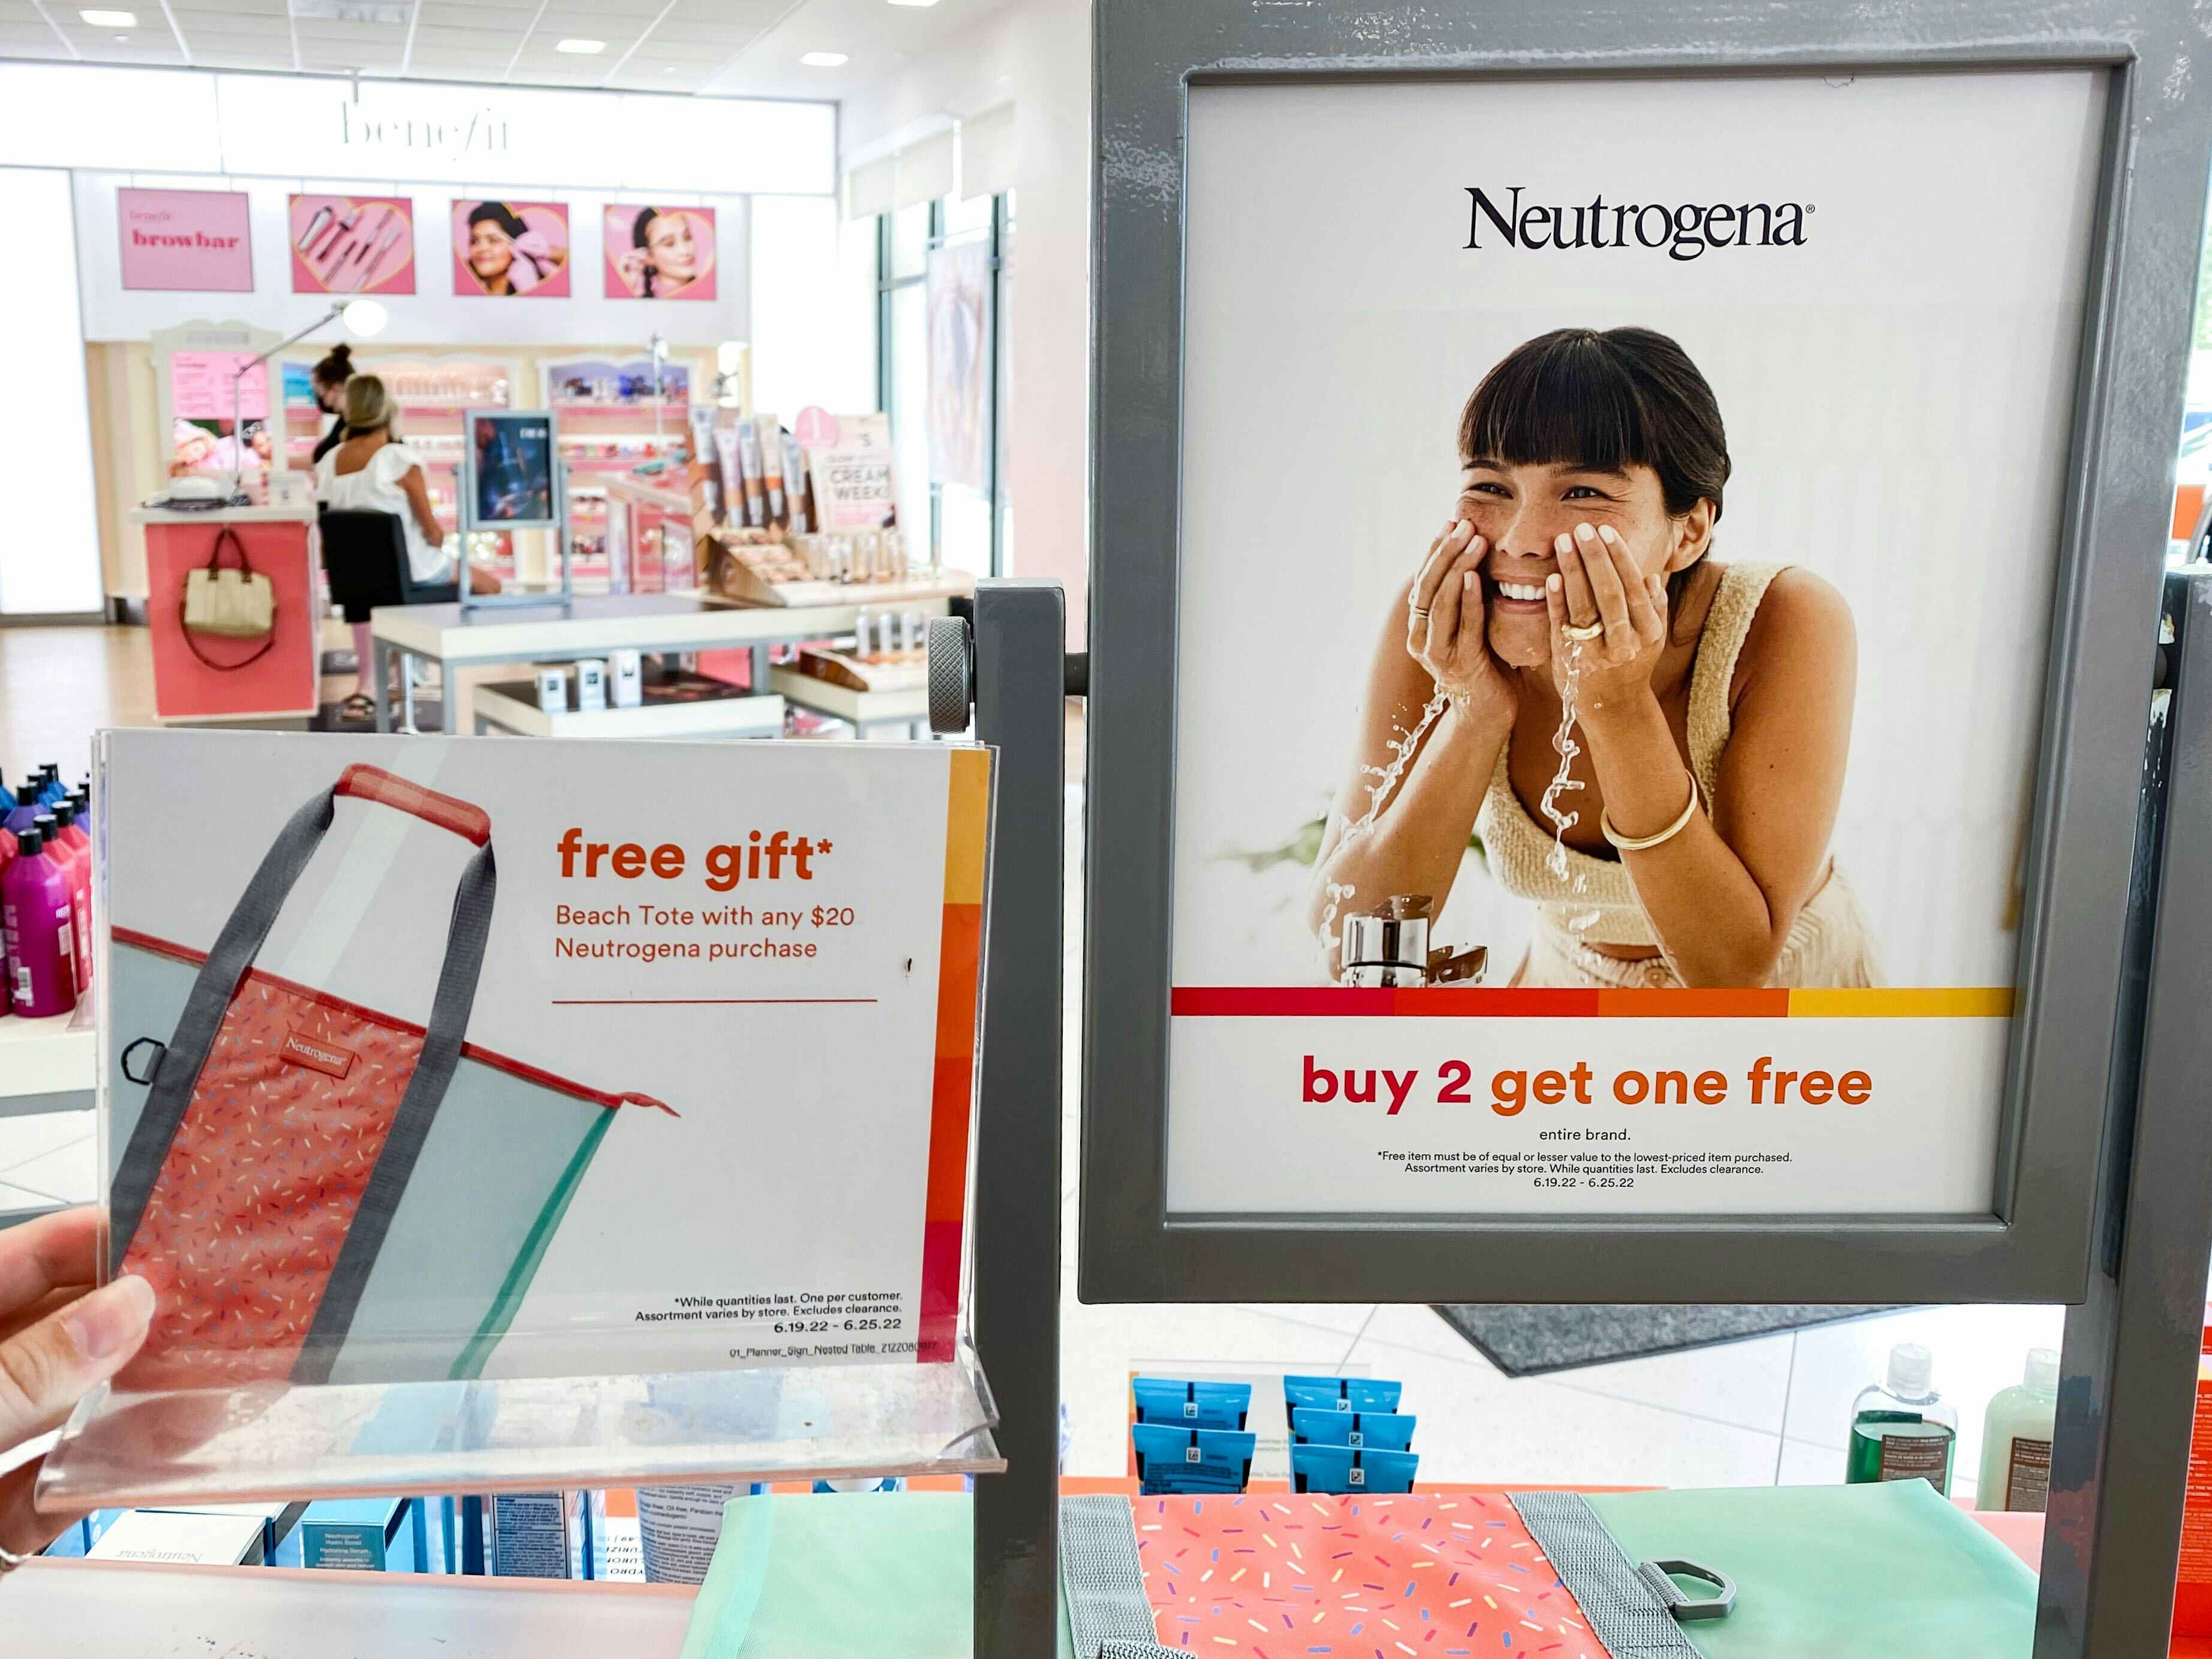 a free neutrogena tote next to a sign saying that if you send $20 or more on neutrogena then you get the free tote